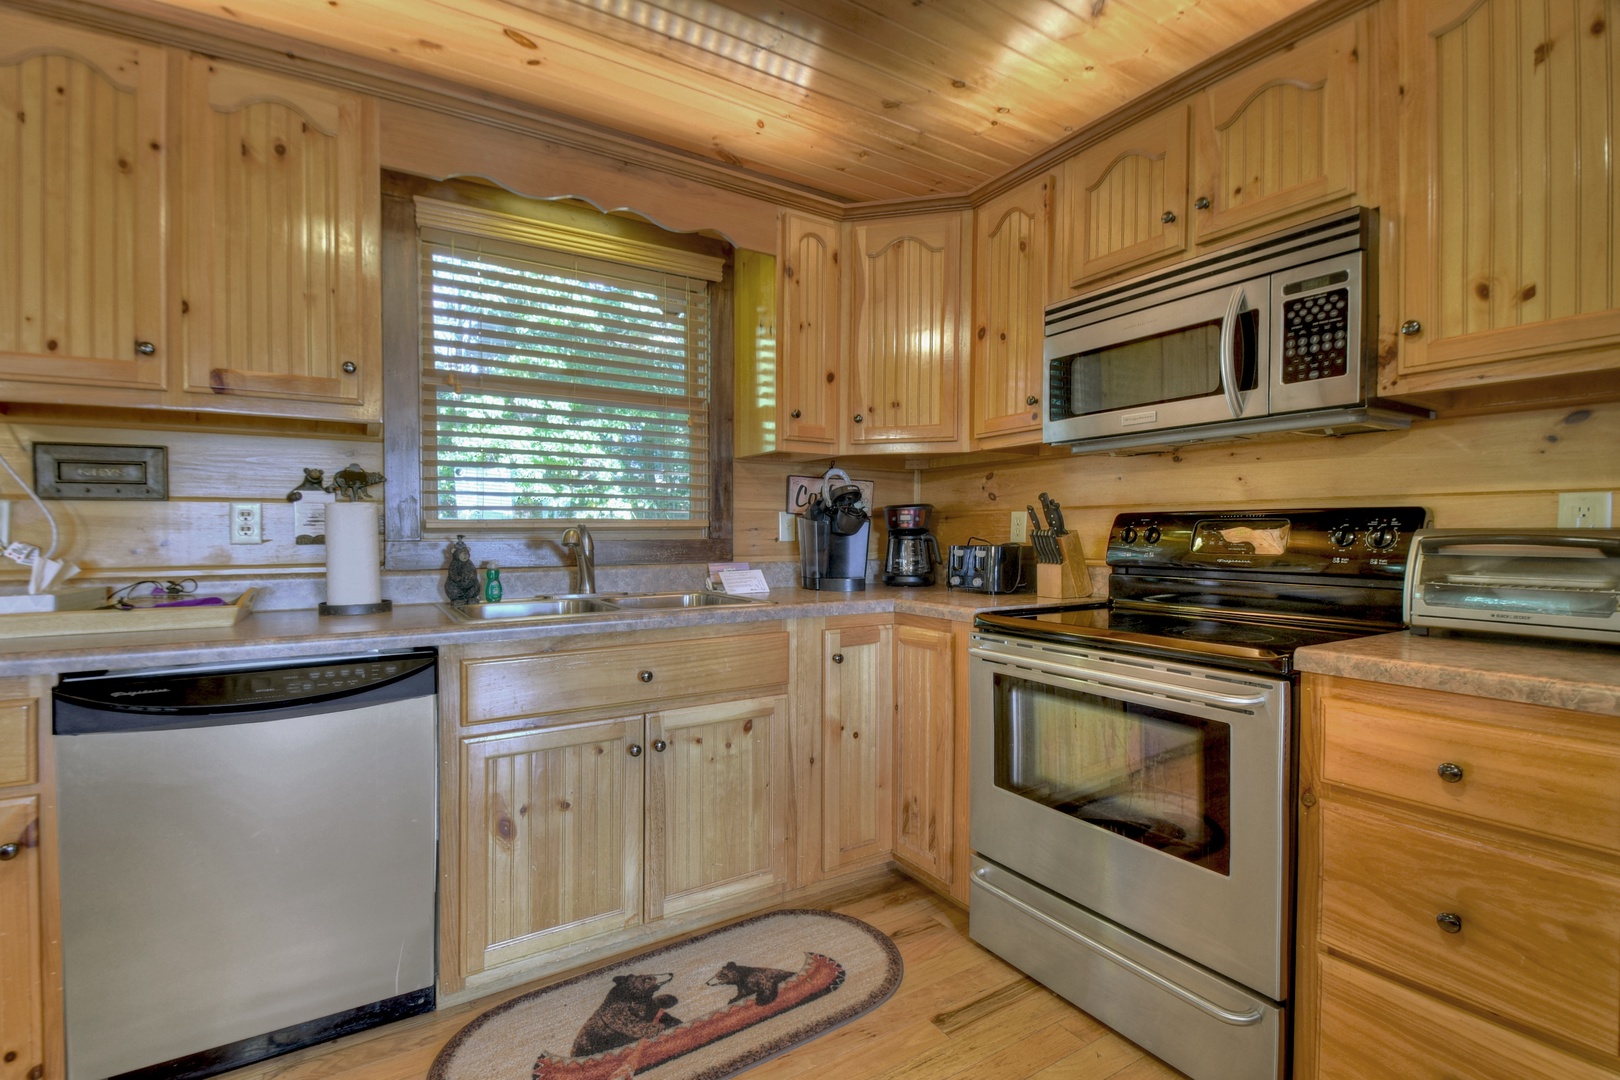 Sunrock Mountain Hideaway- Stainless steel appliances with rustic cabinets